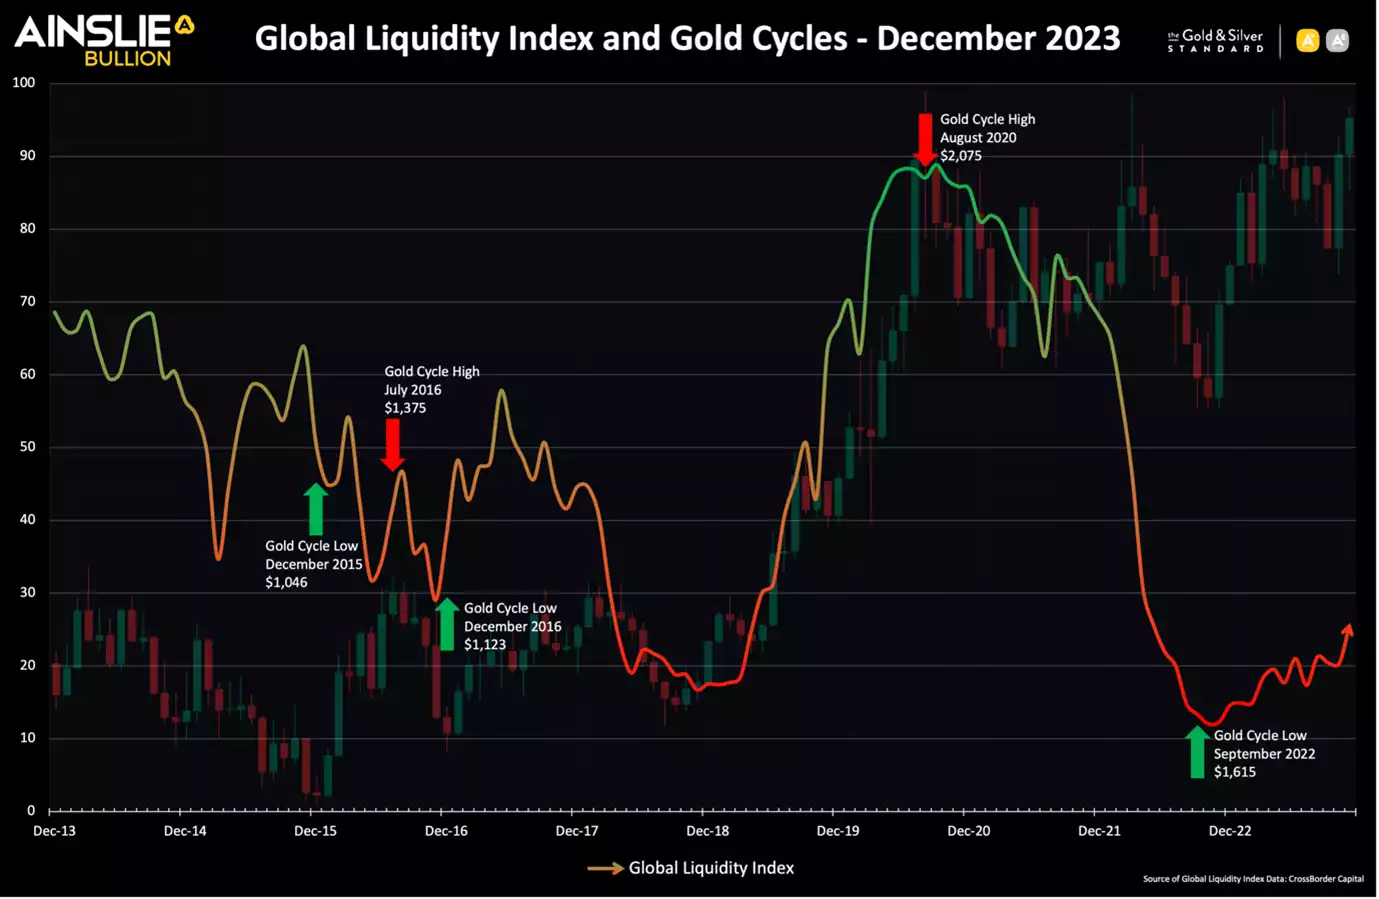 Global Liquidity Index and Gold Cycles - December 2023